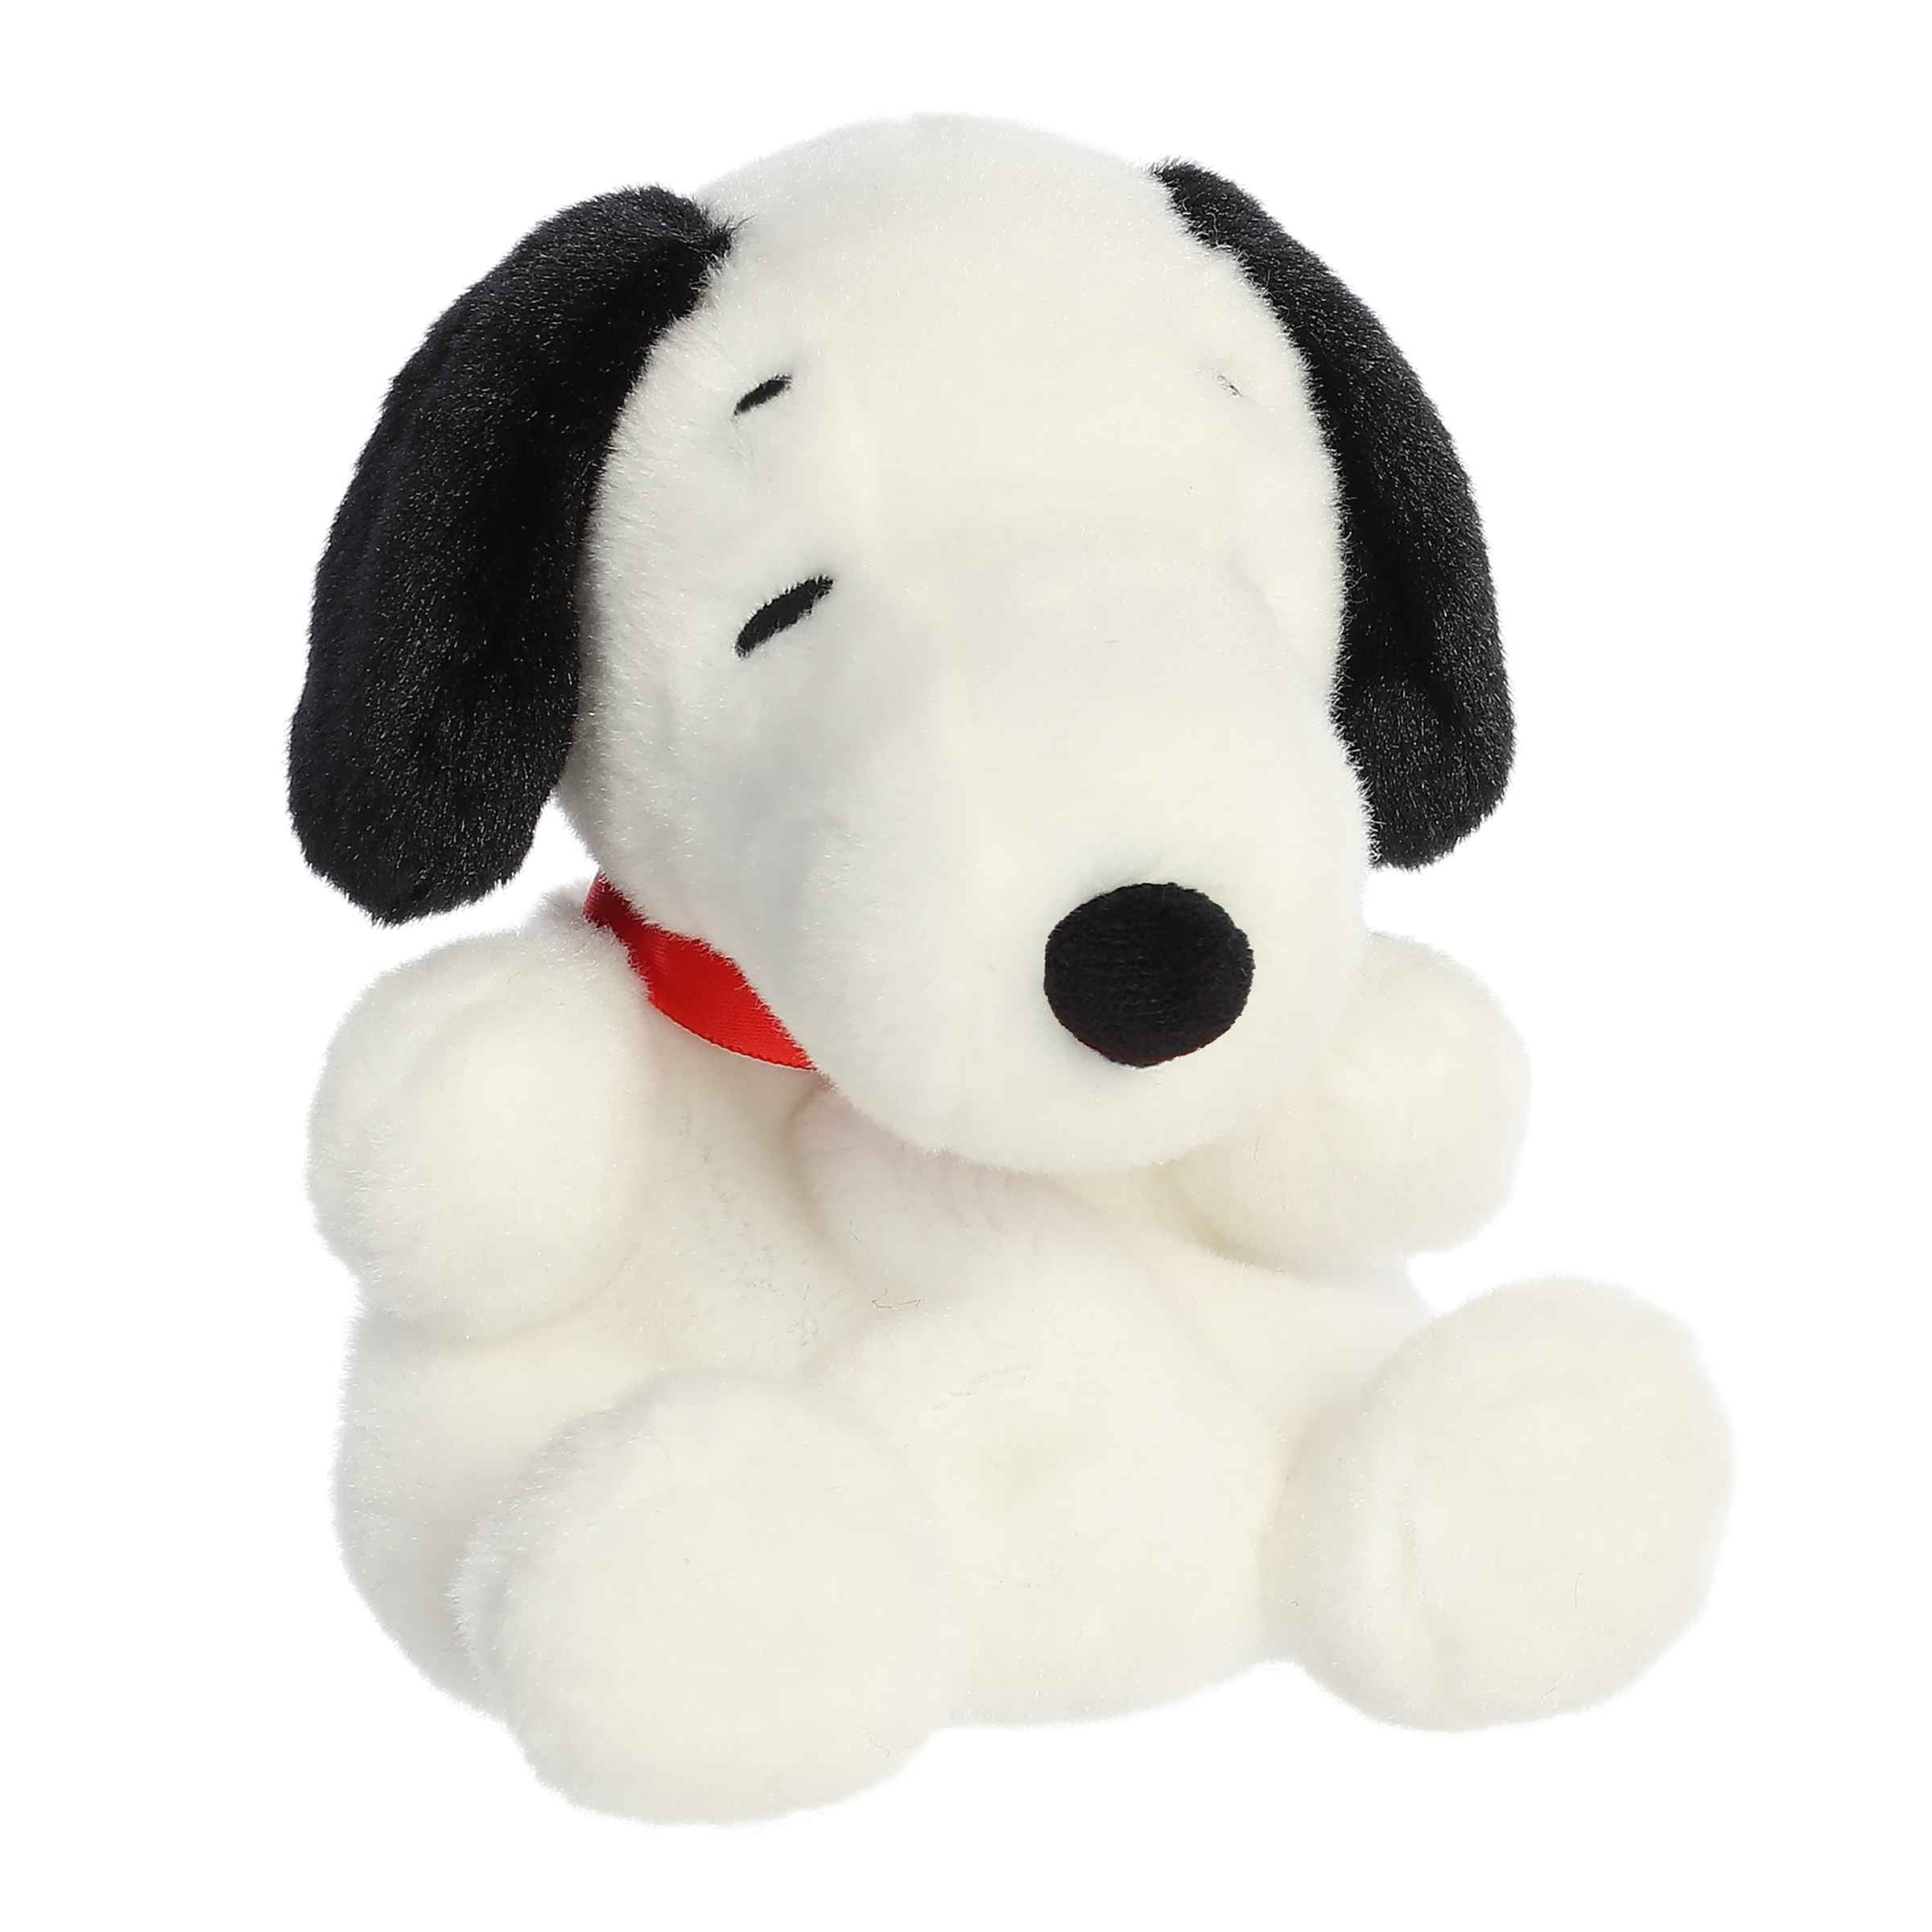 Palm Pals Snoopy plush from Peanuts plush collection with soft white fur and black spot, perfect for cuddles